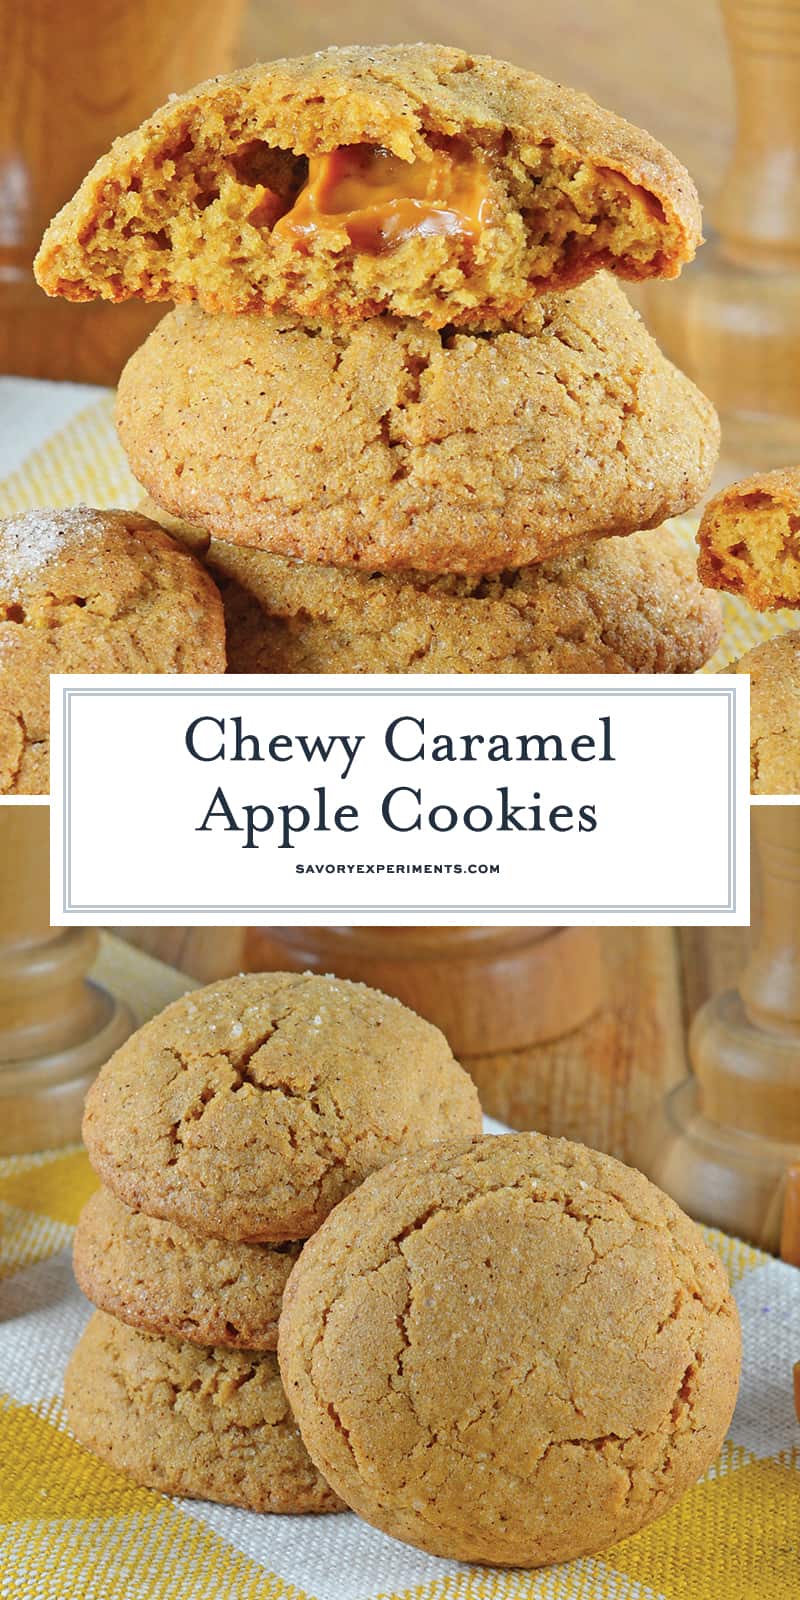 Caramel Apple Cookies are an easy, mess free way to enjoy a caramel apple! This fall cookie recipe is apple spiced cookie dough stuffed with gooey caramel! #applecookies #caramelapple #fallcookierecipe www.savoryexperiments.com